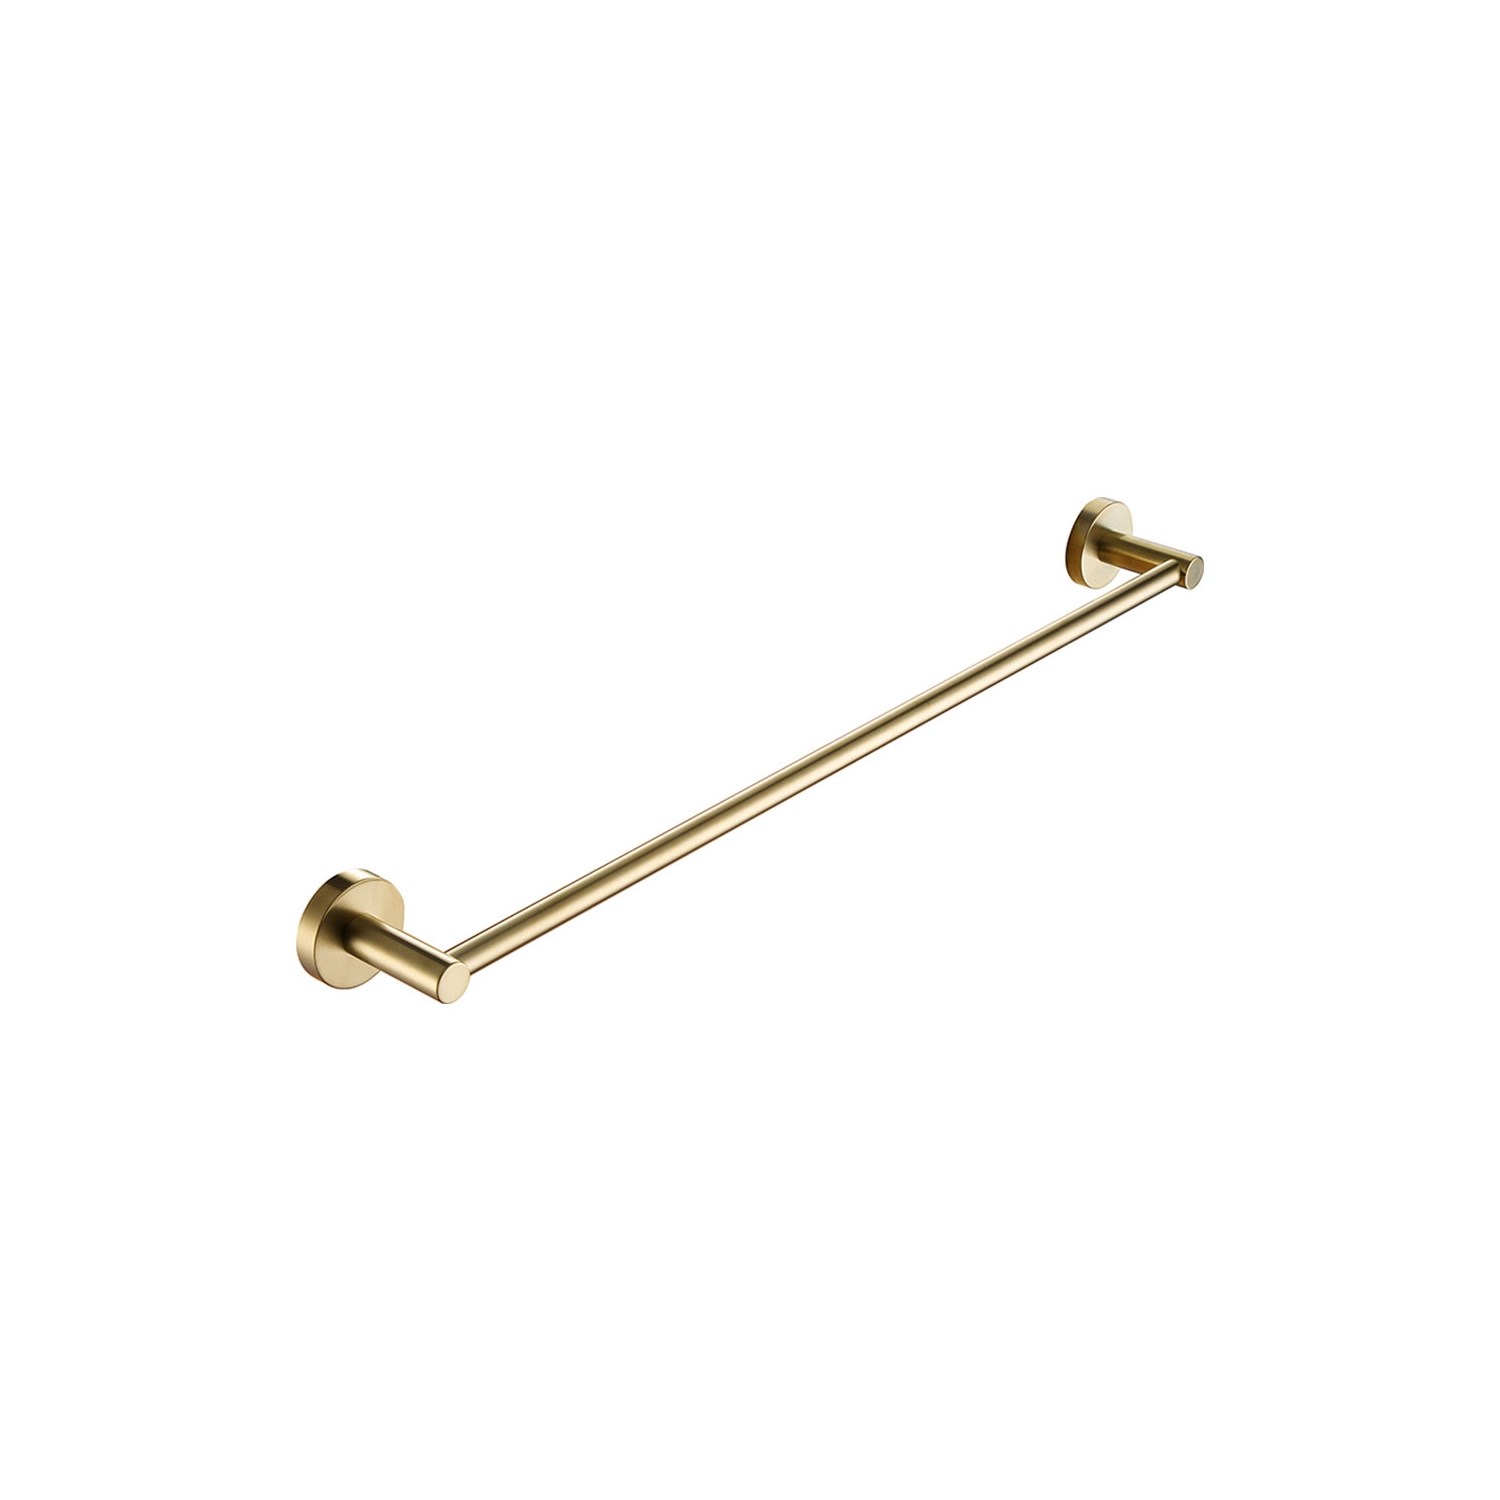 https://img.tapwarehouse.com/social/products/vos-towel-rail-brushed-brass.jpg